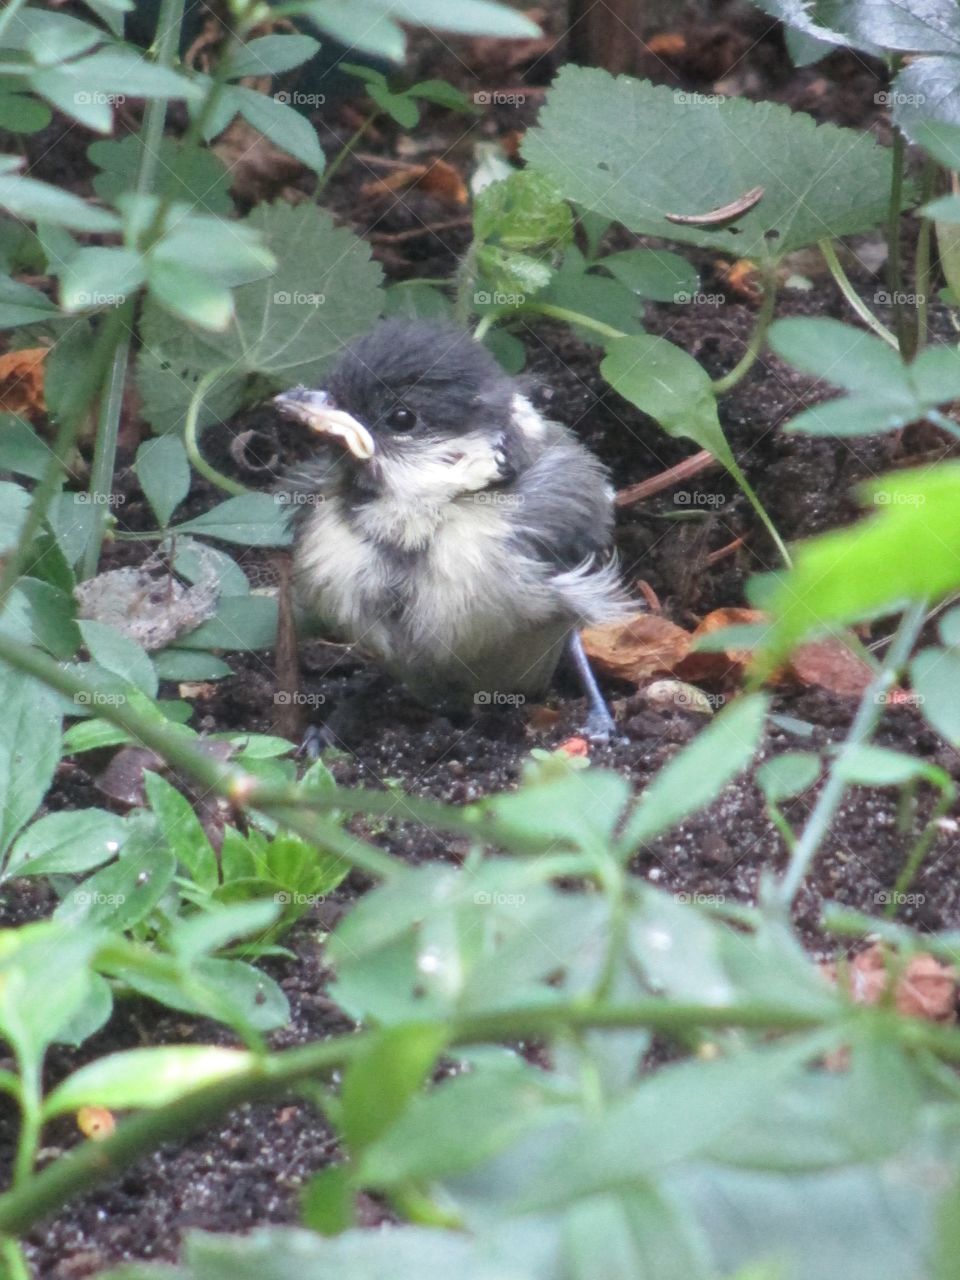 Wildlife in the city, a young tit